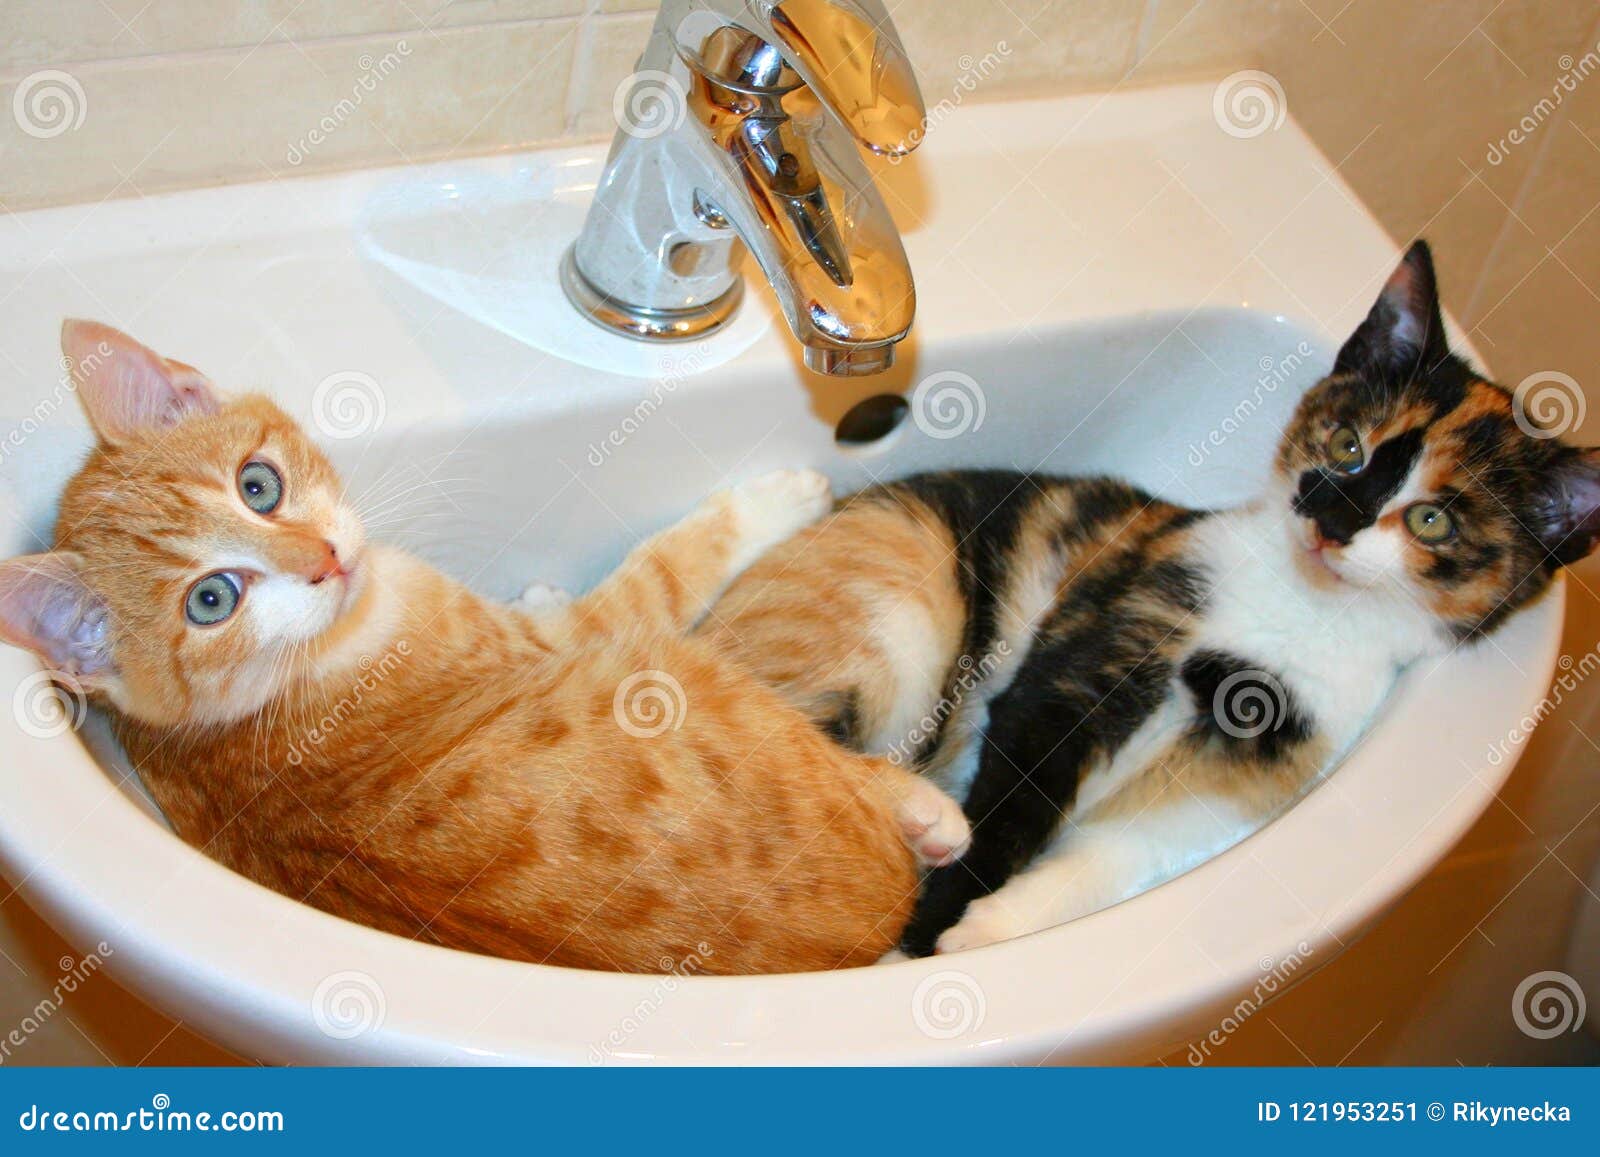 Funny Scene - Two Kittens Sleep in a Washbasin. it is Humorous Photo with  Comedy Concept. Stock Image - Image of beautiful, humorous: 121953251